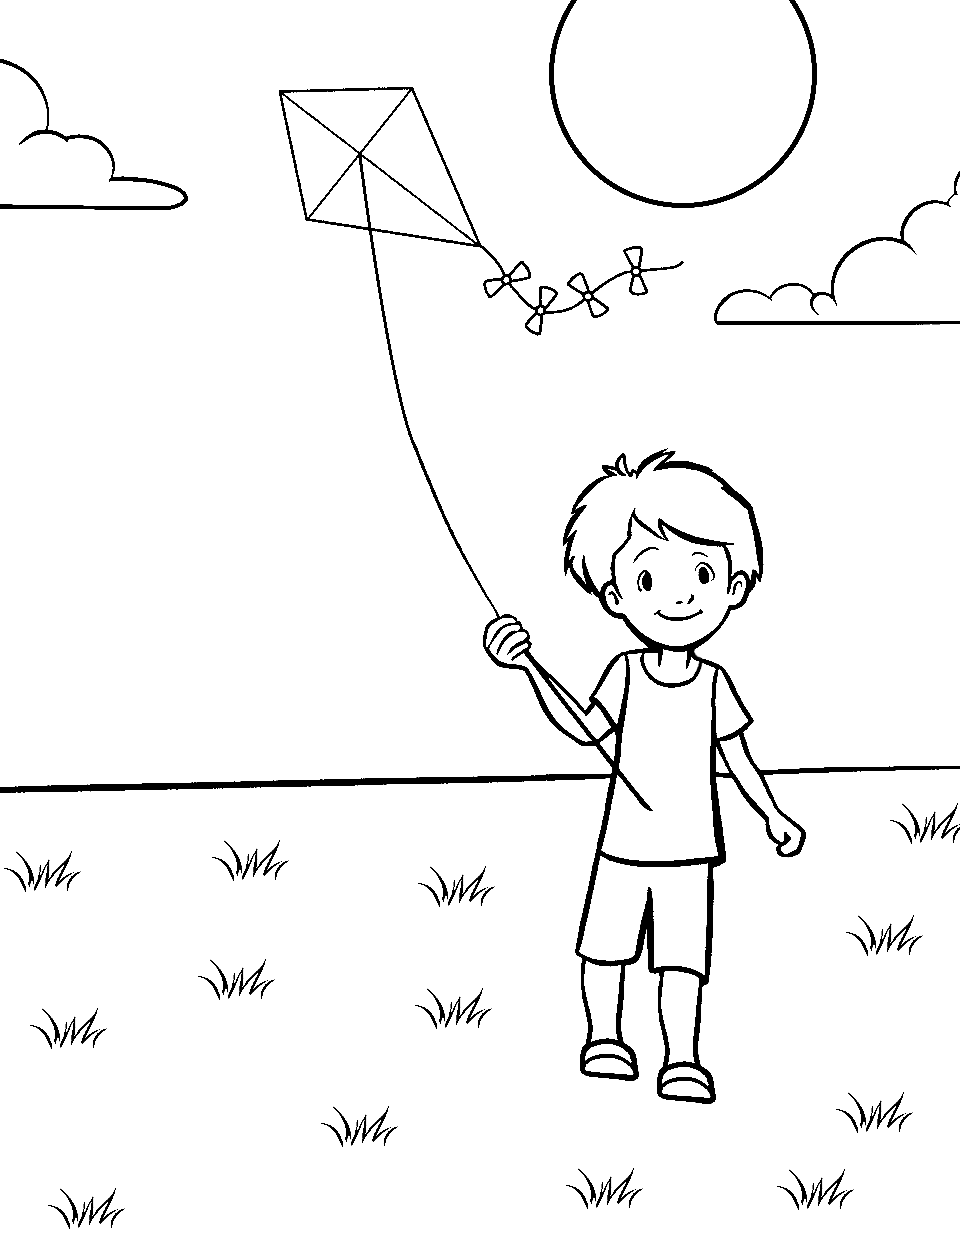 Kite Flying Fun Coloring Page - A child flying a kite in an open field.